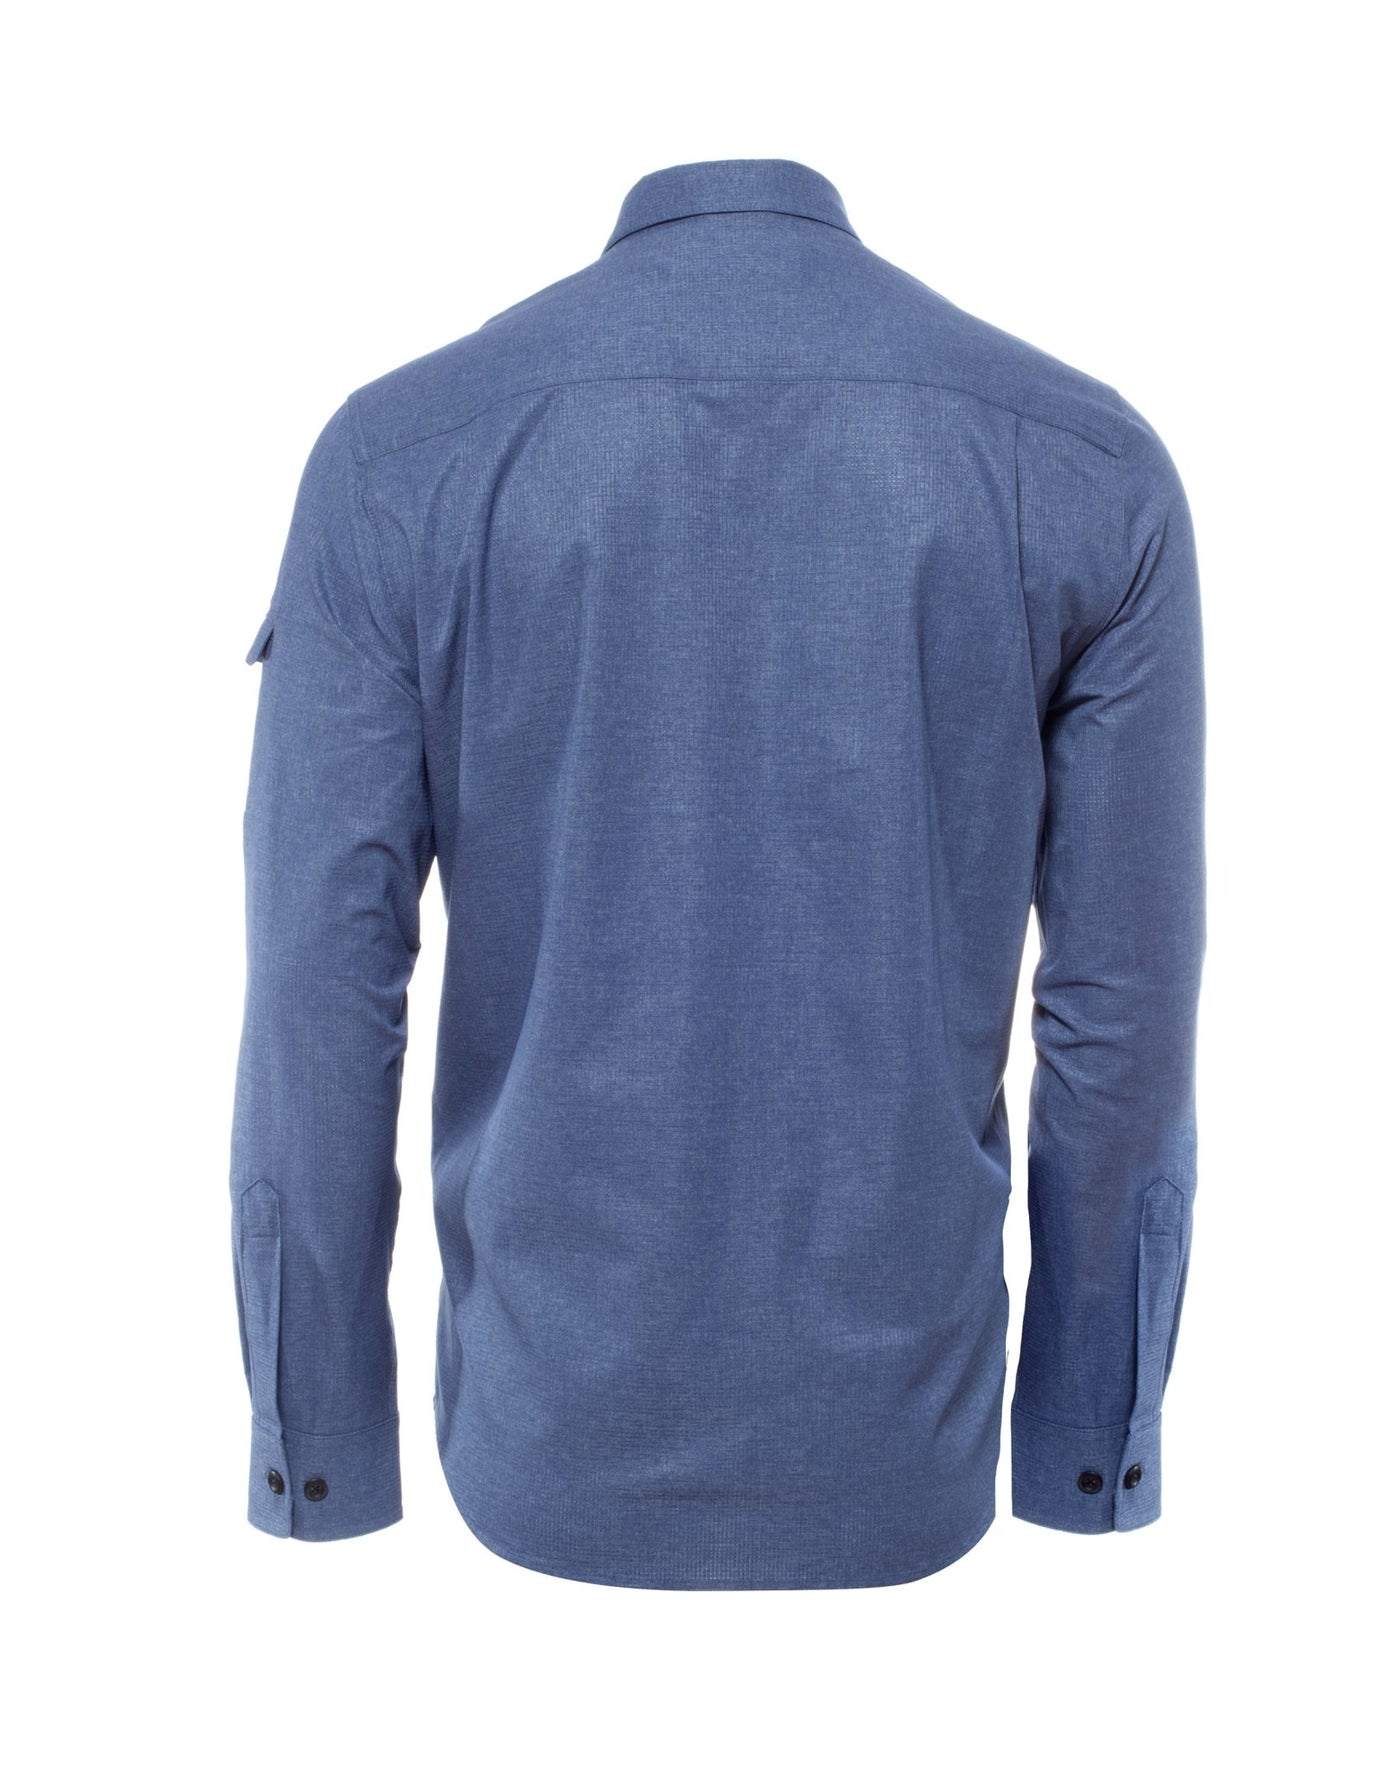 Green River Long Sleeve Quick Dry Fishing Guide Shirt - The American Outdoorsman #color_chambray-blue